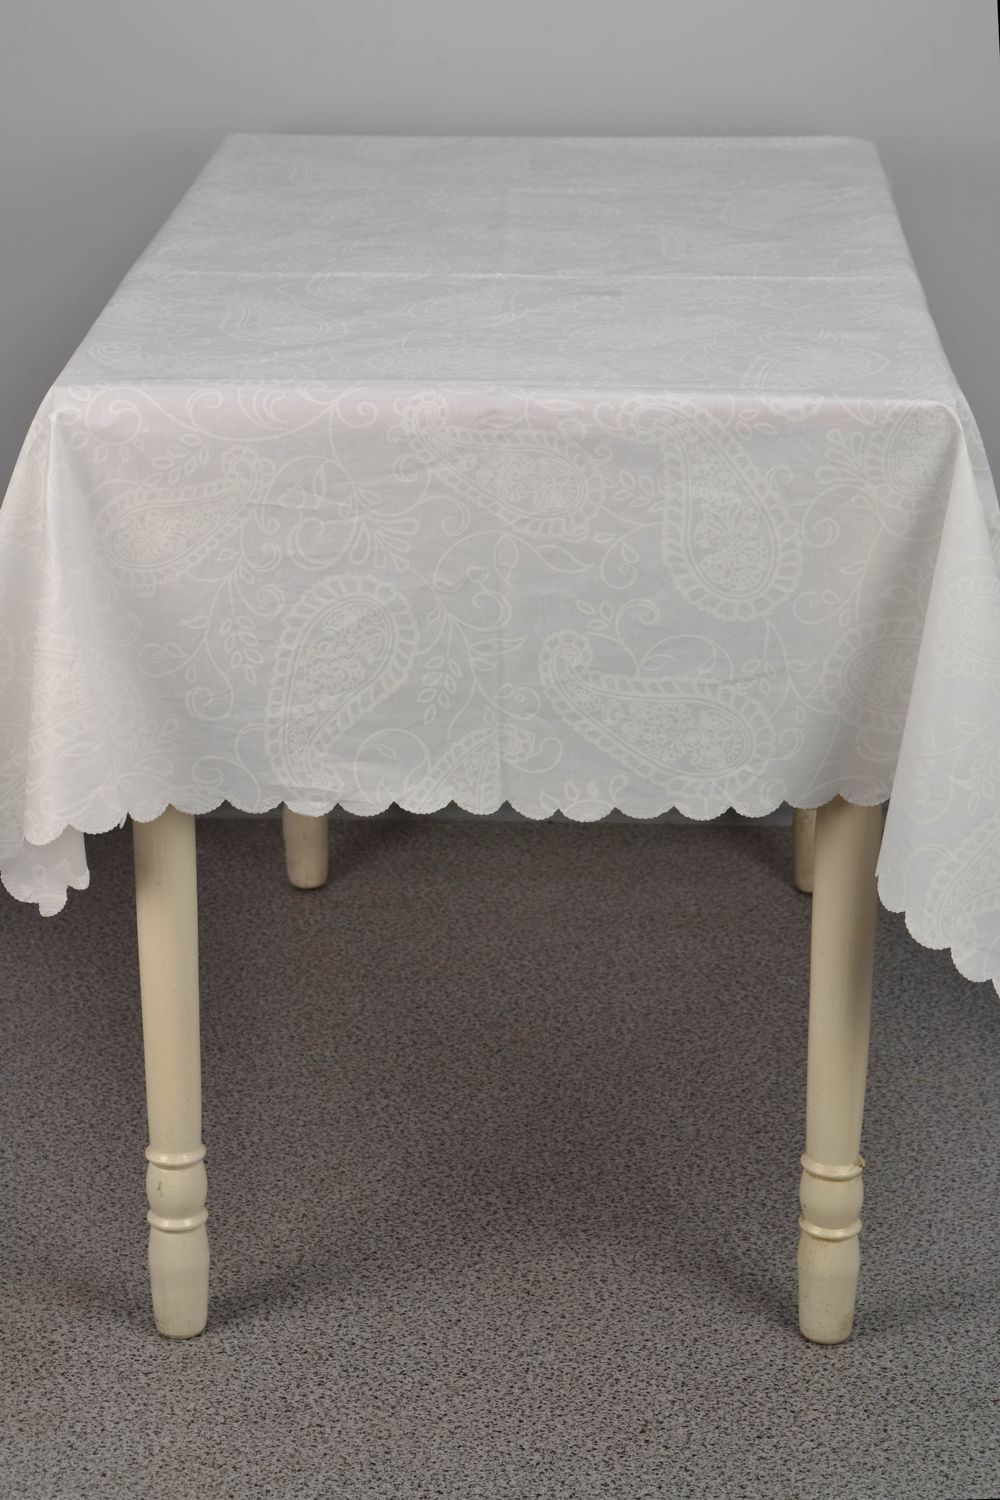 White ornamented tablecloth photo 2